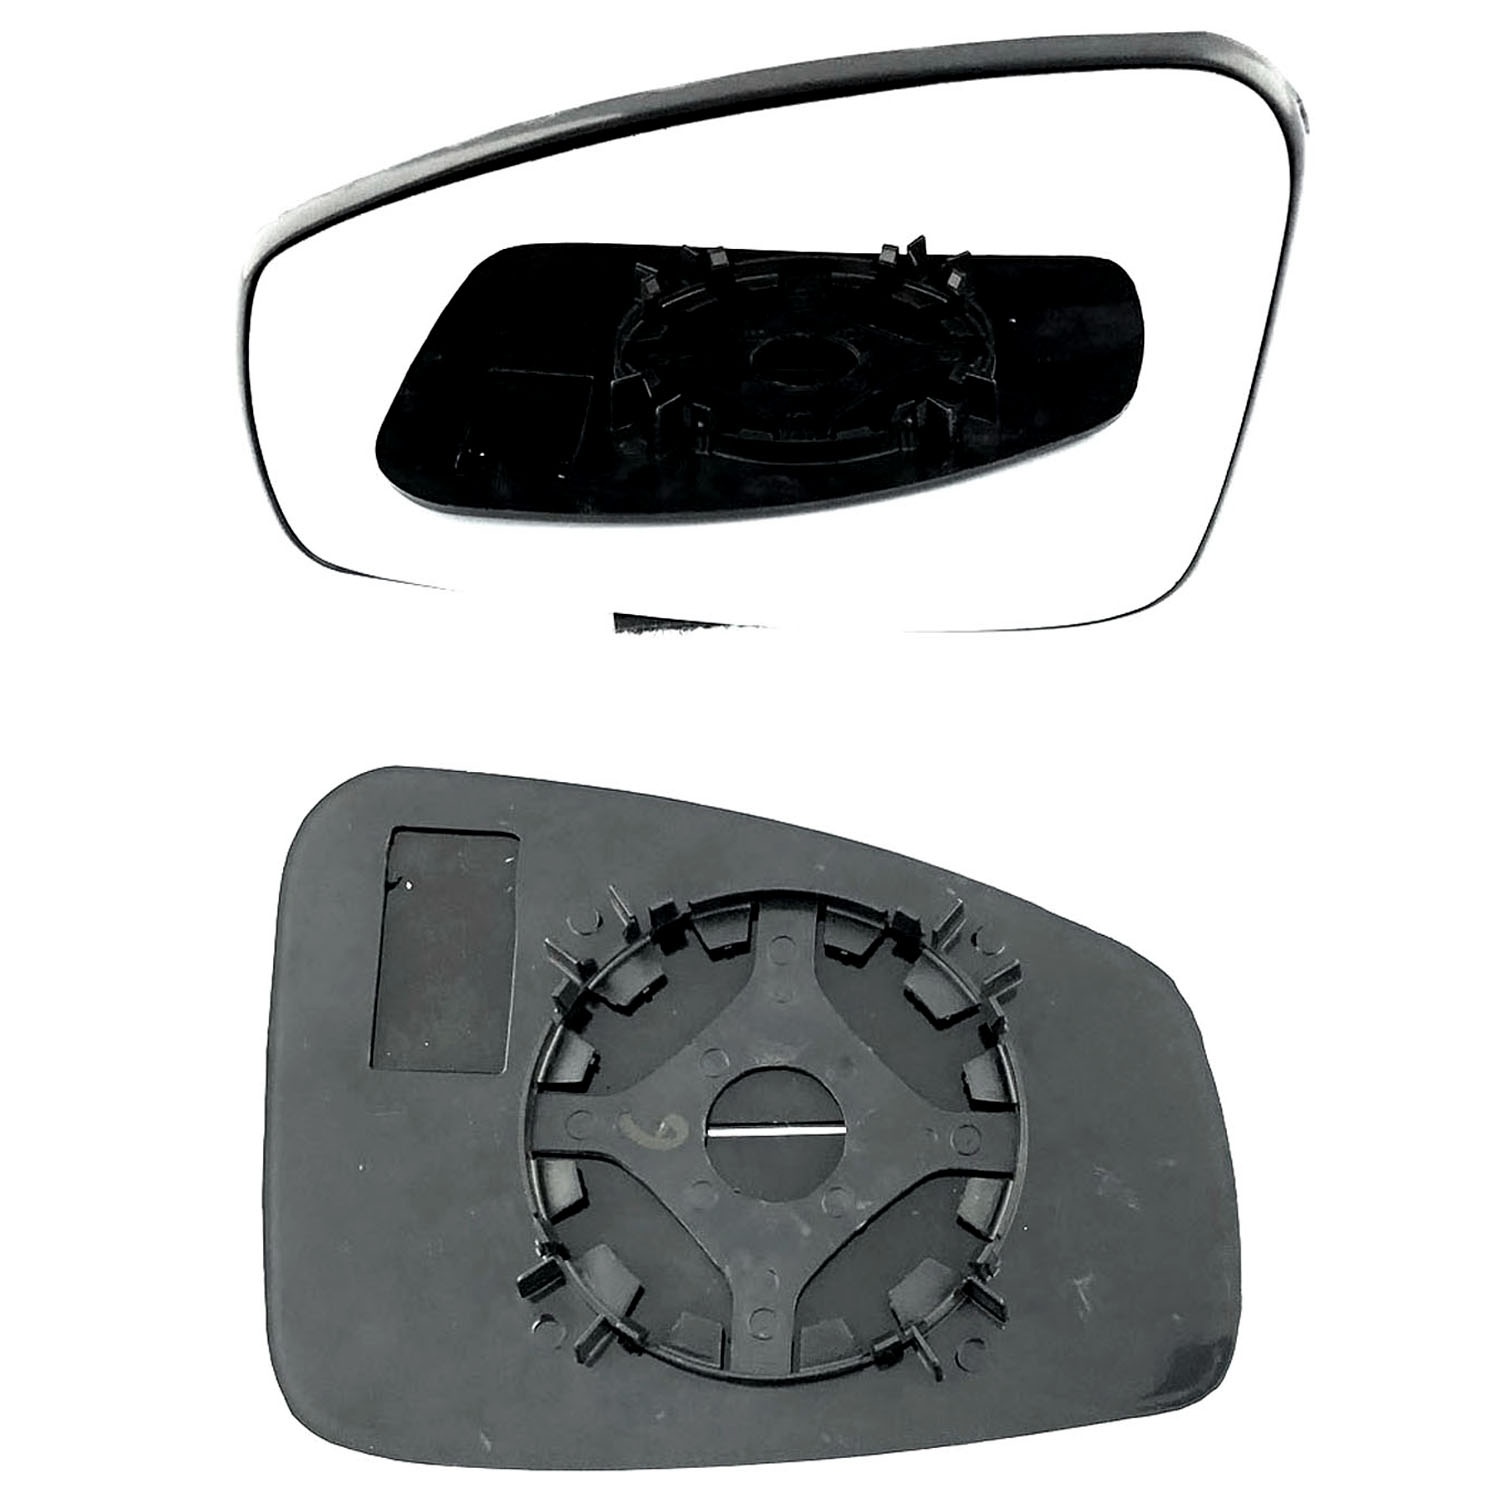 Renault Laguna Wing Mirror Glass With Base LEFT HAND ( UK Passenger Side ) 2008 to 2015 – Convex Wing Mirror